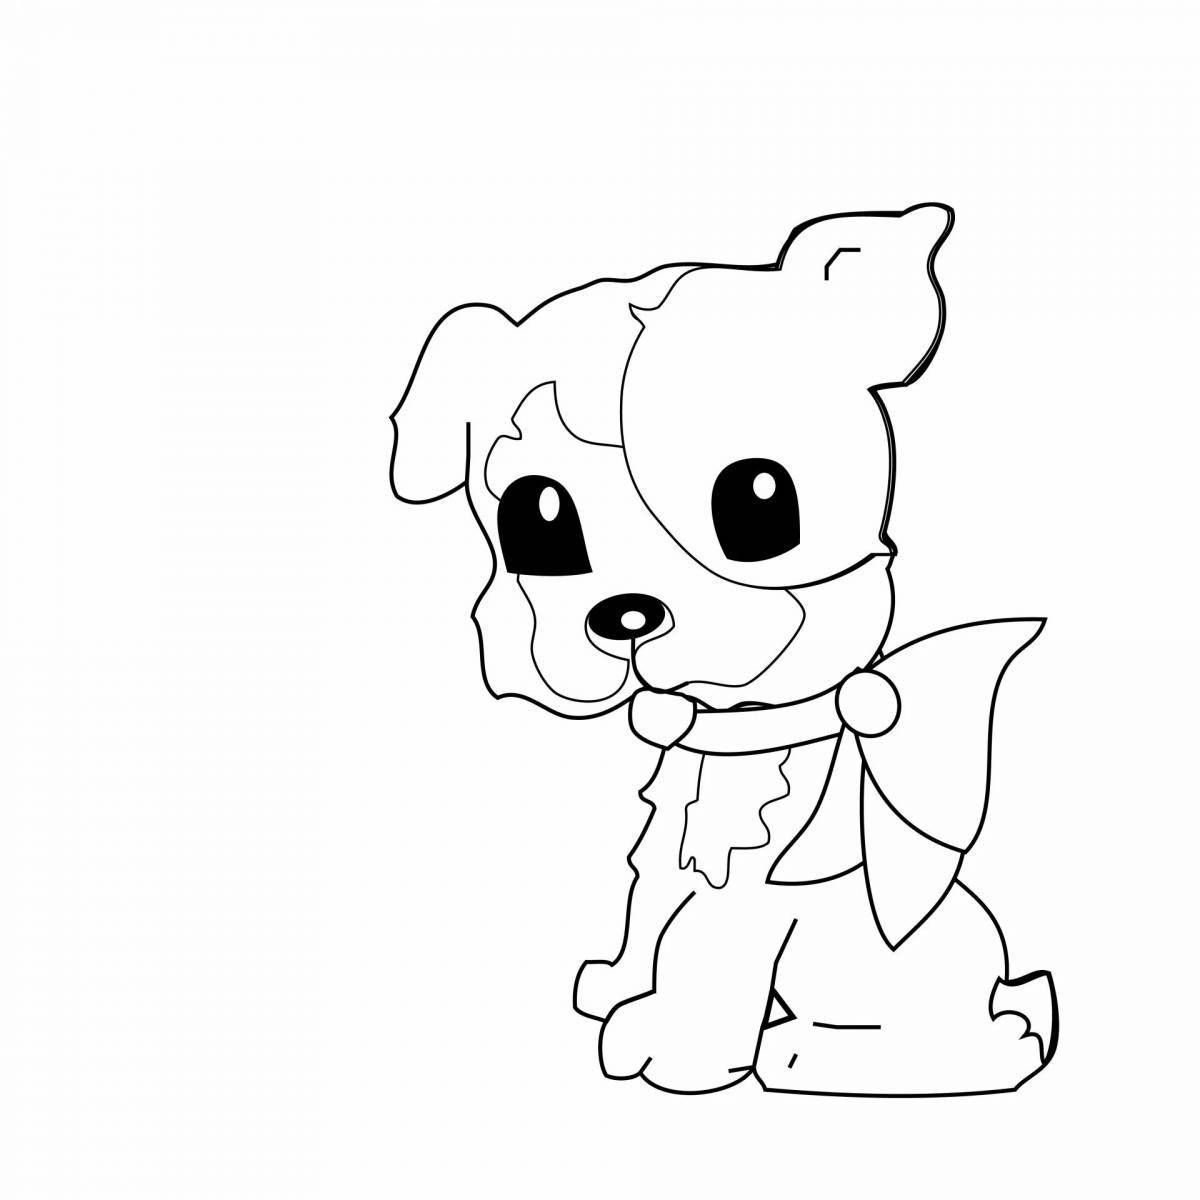 Coloring book fluffy cute puppy